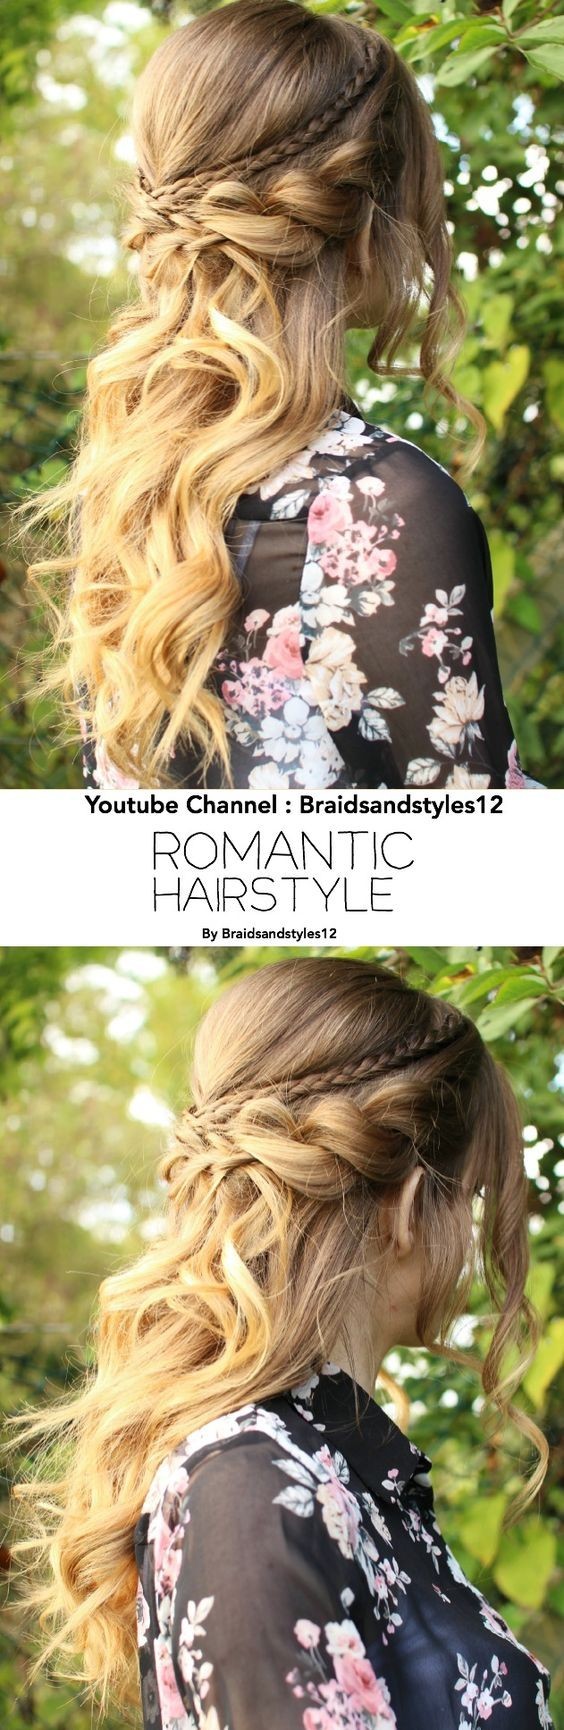 18 Elegant Hairstyles For Prom 2020